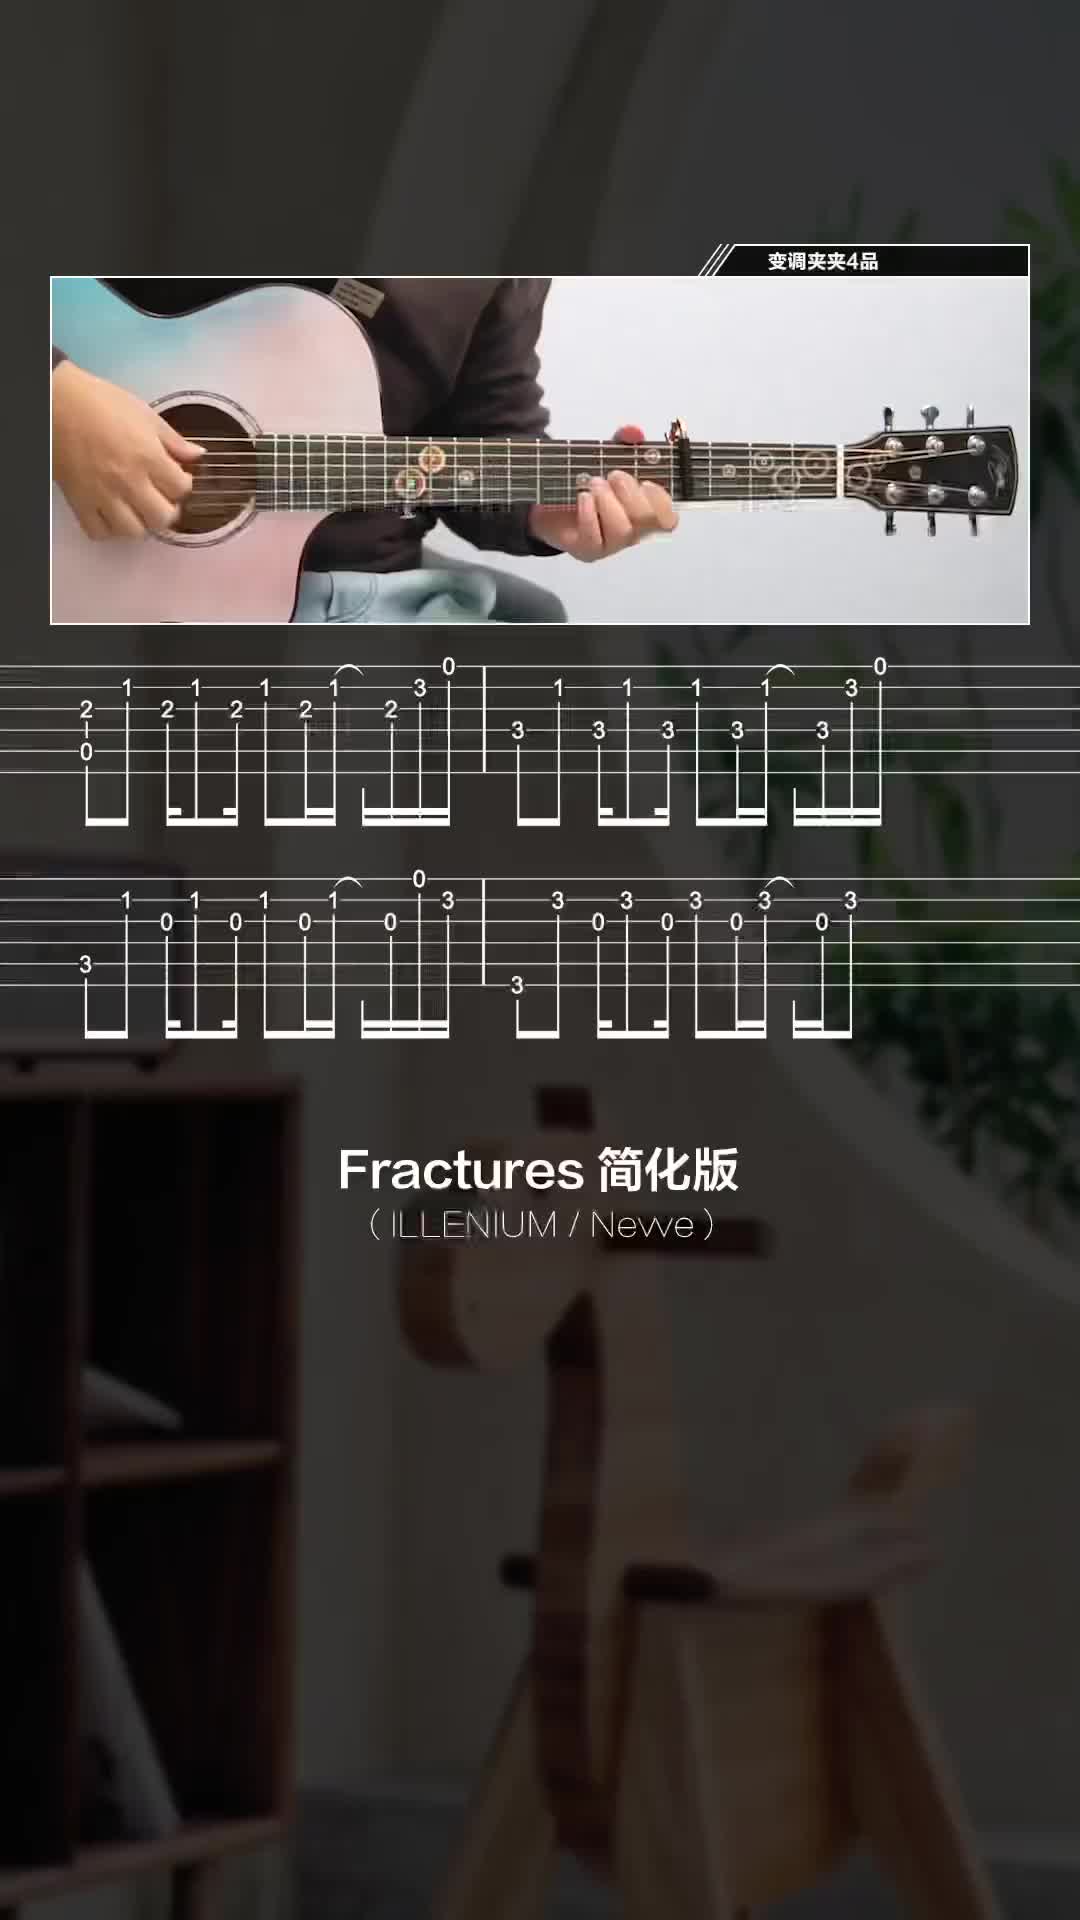 fractures简谱钢琴图片